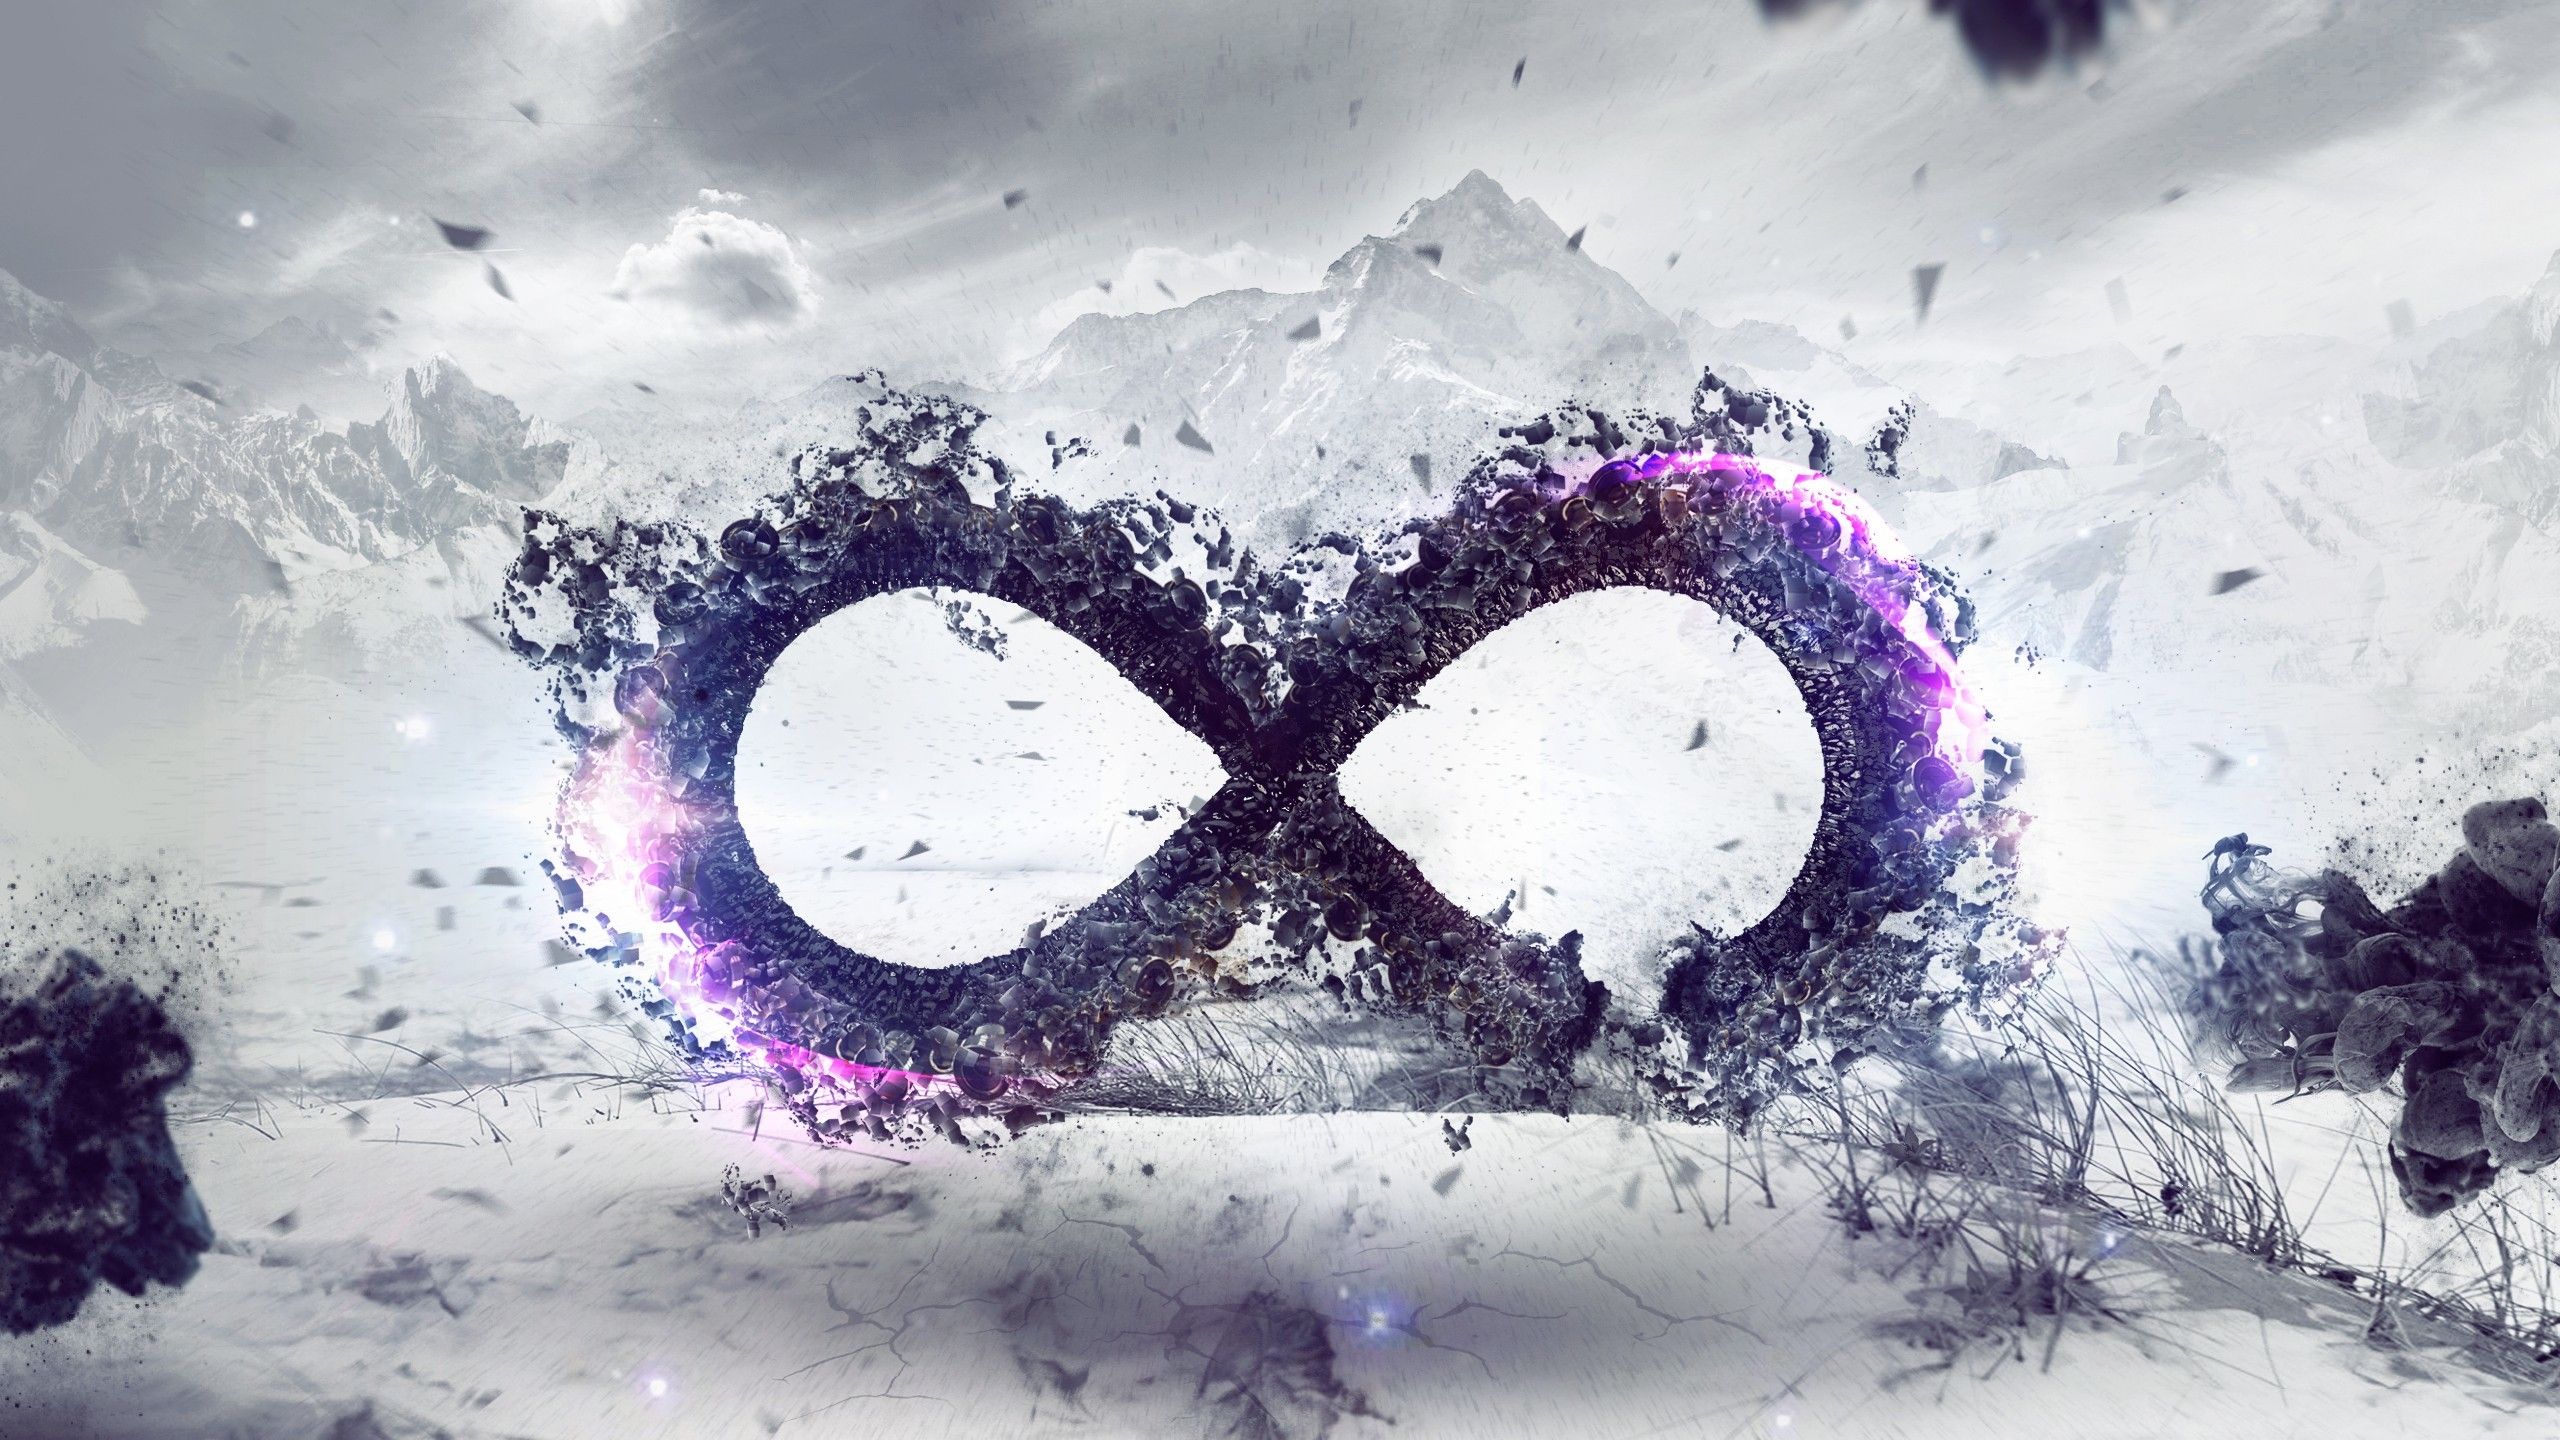 Infinity Sign Wallpaper Free Infinity Sign Background